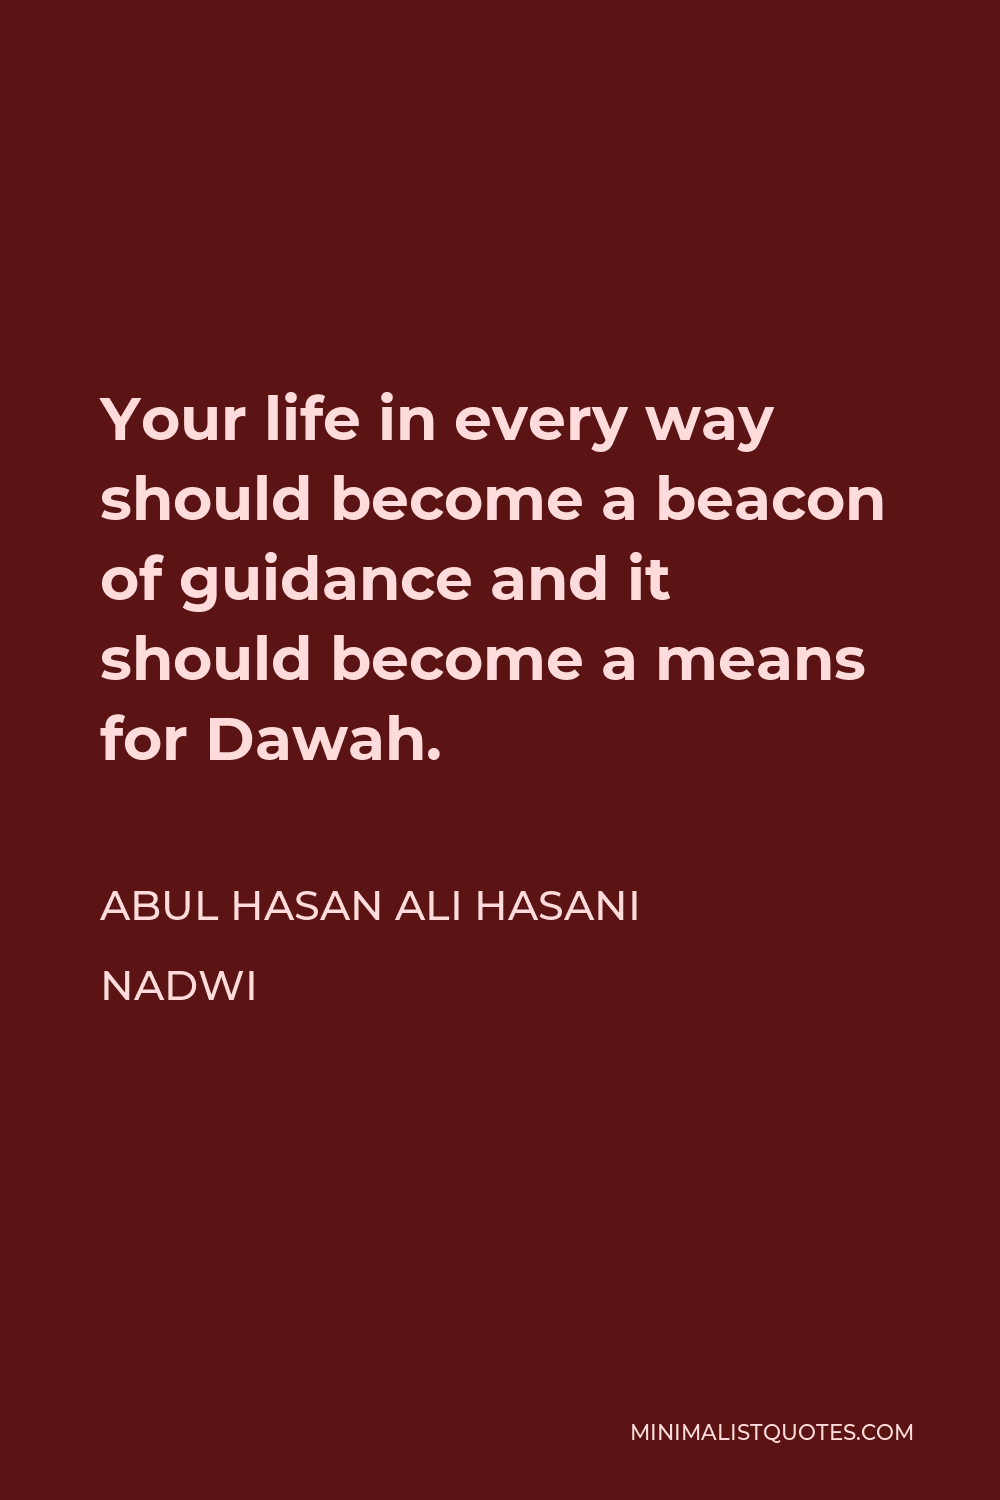 Abul Hasan Ali Hasani Nadwi Quote - Your life in every way should become a beacon of guidance and it should become a means for Dawah.